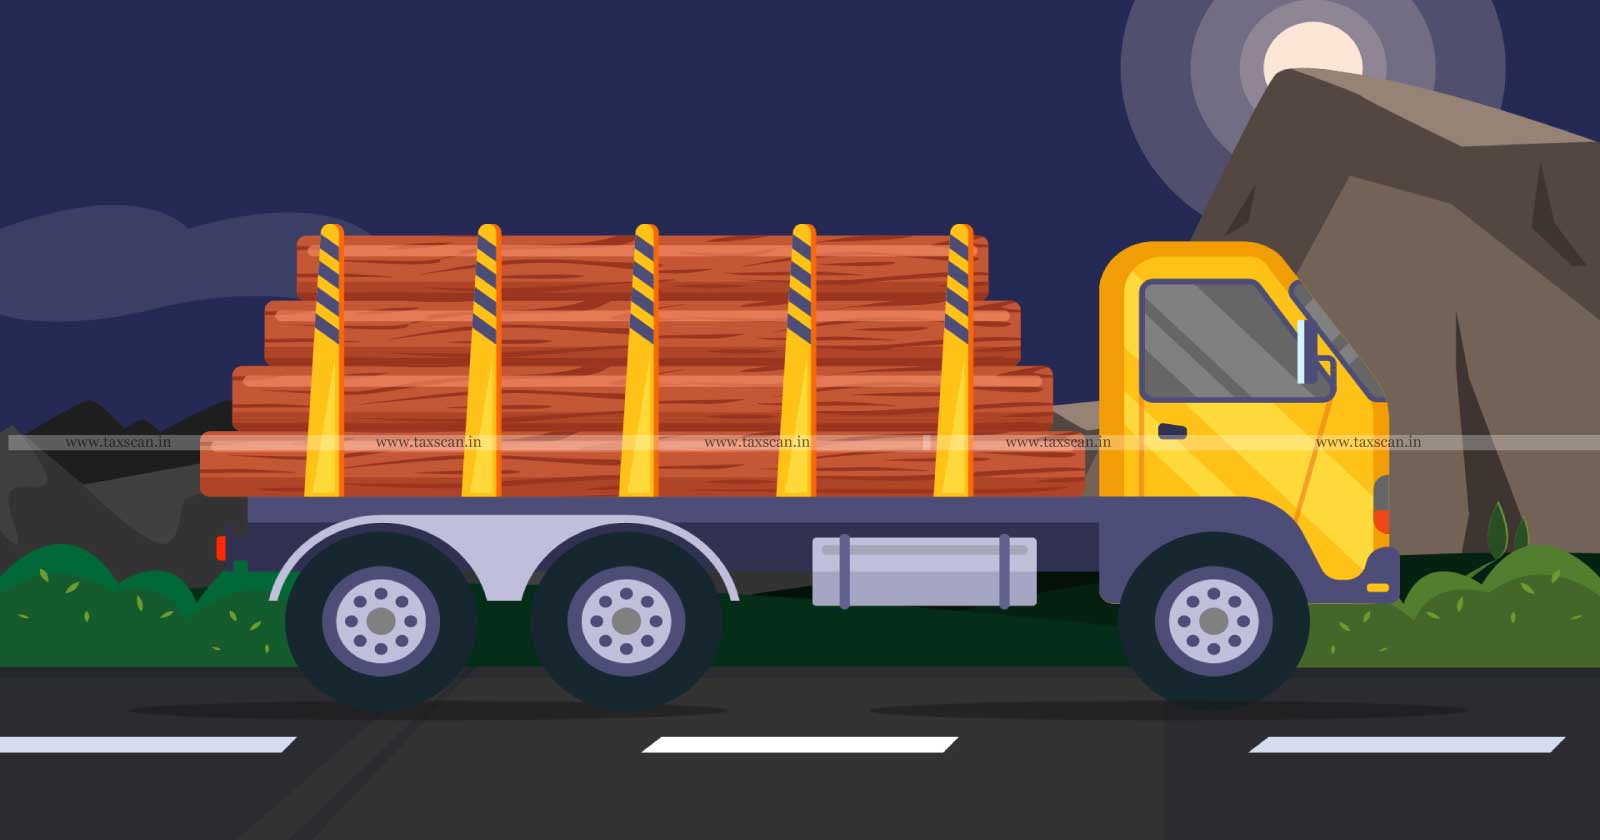 Confiscation of Truck - Truck - Transporting Red Sander Wood - Red Sander Wood - CESTAT - Refund Security Deposit - Himalayan Roadways - taxscan